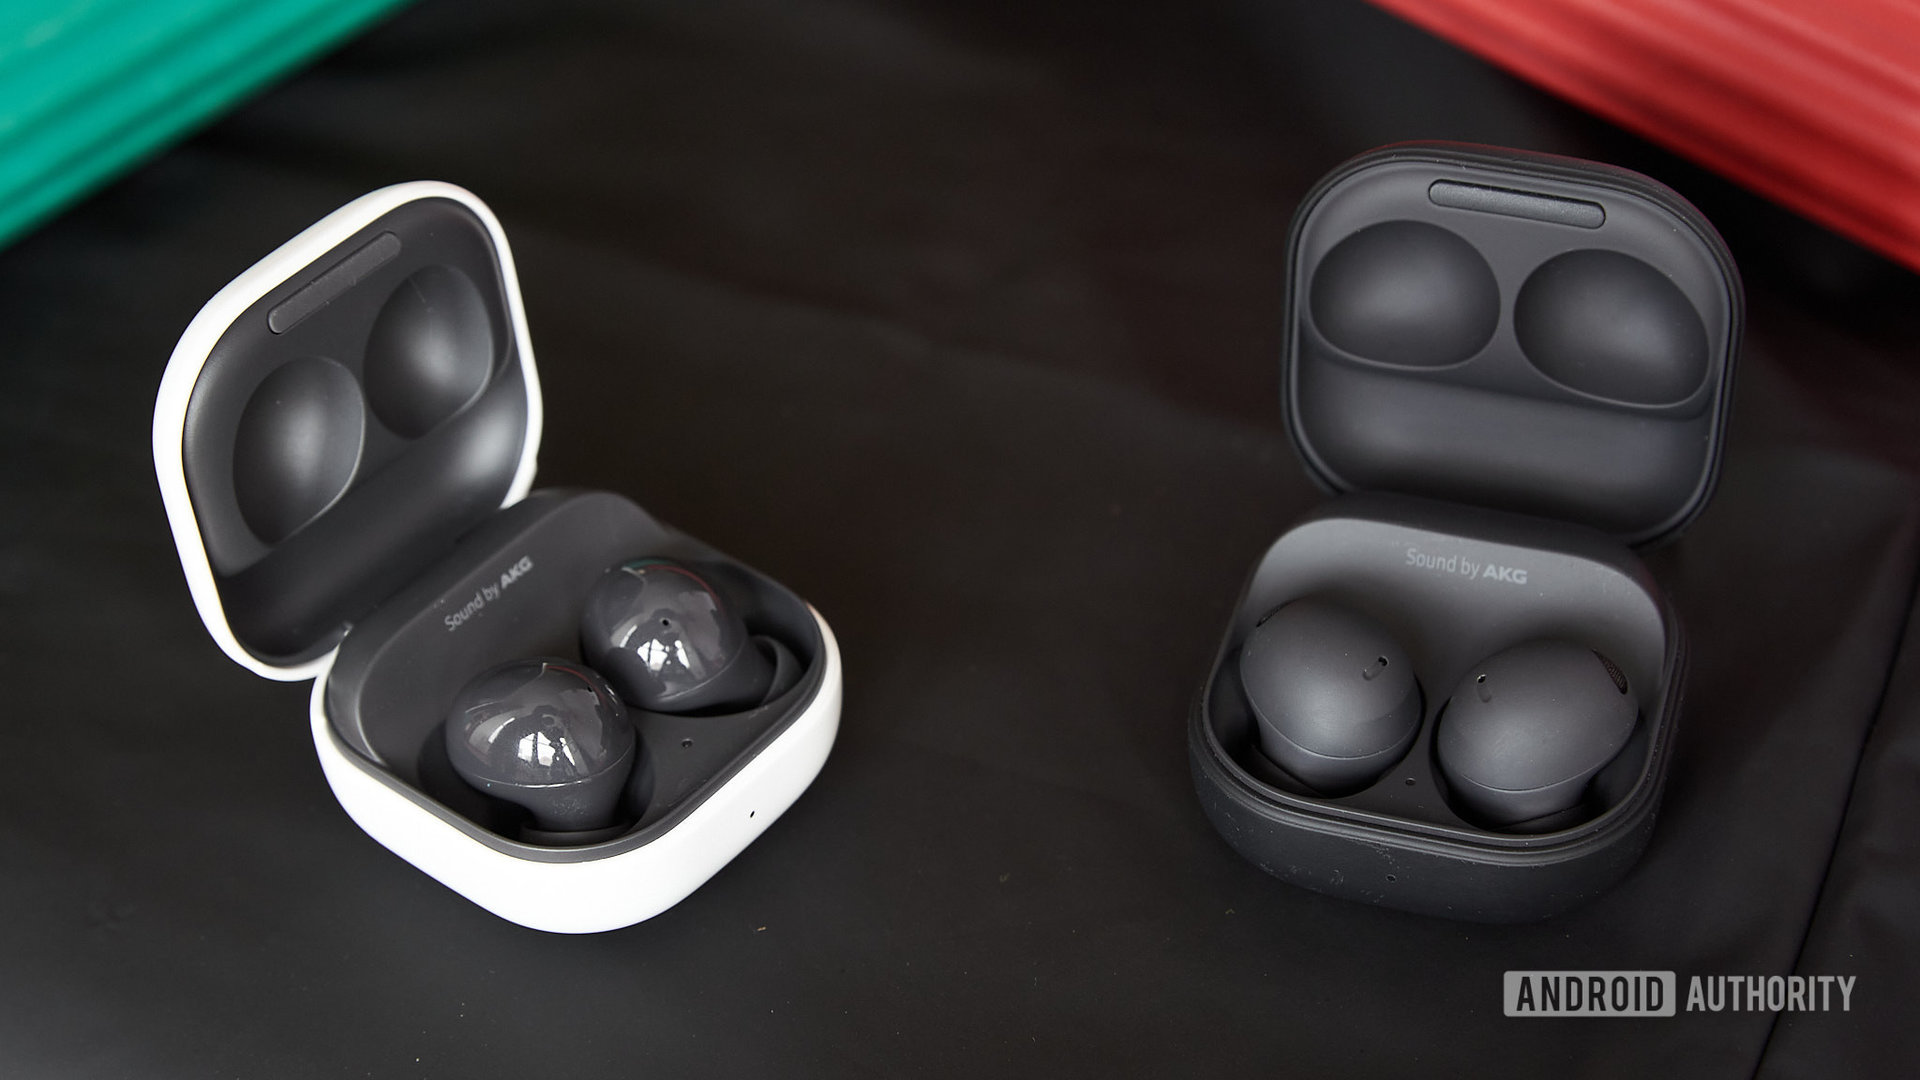 The Samsung Galaxy Buds 2 Pro vs Samsung Galaxy Buds 2 earbuds in their cases.